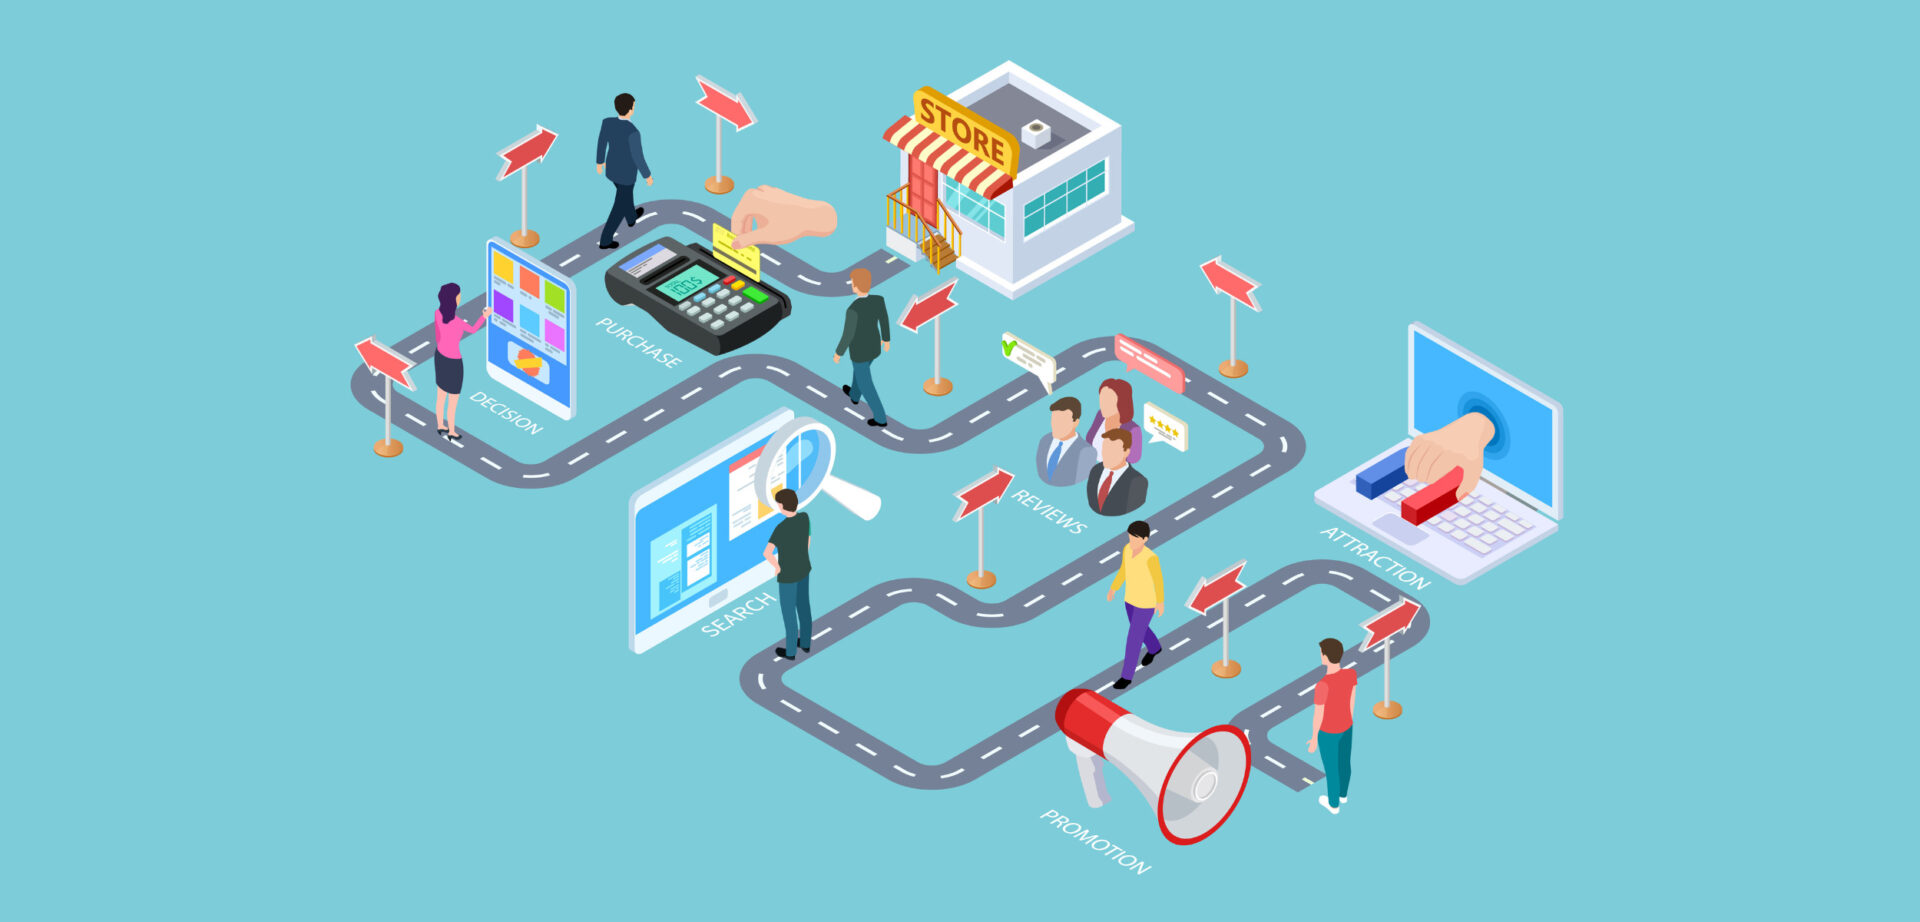 Customer journey refers to the journey that consumers will be through when they are considering to buy a product. Including awareness, consideration, and loyalty